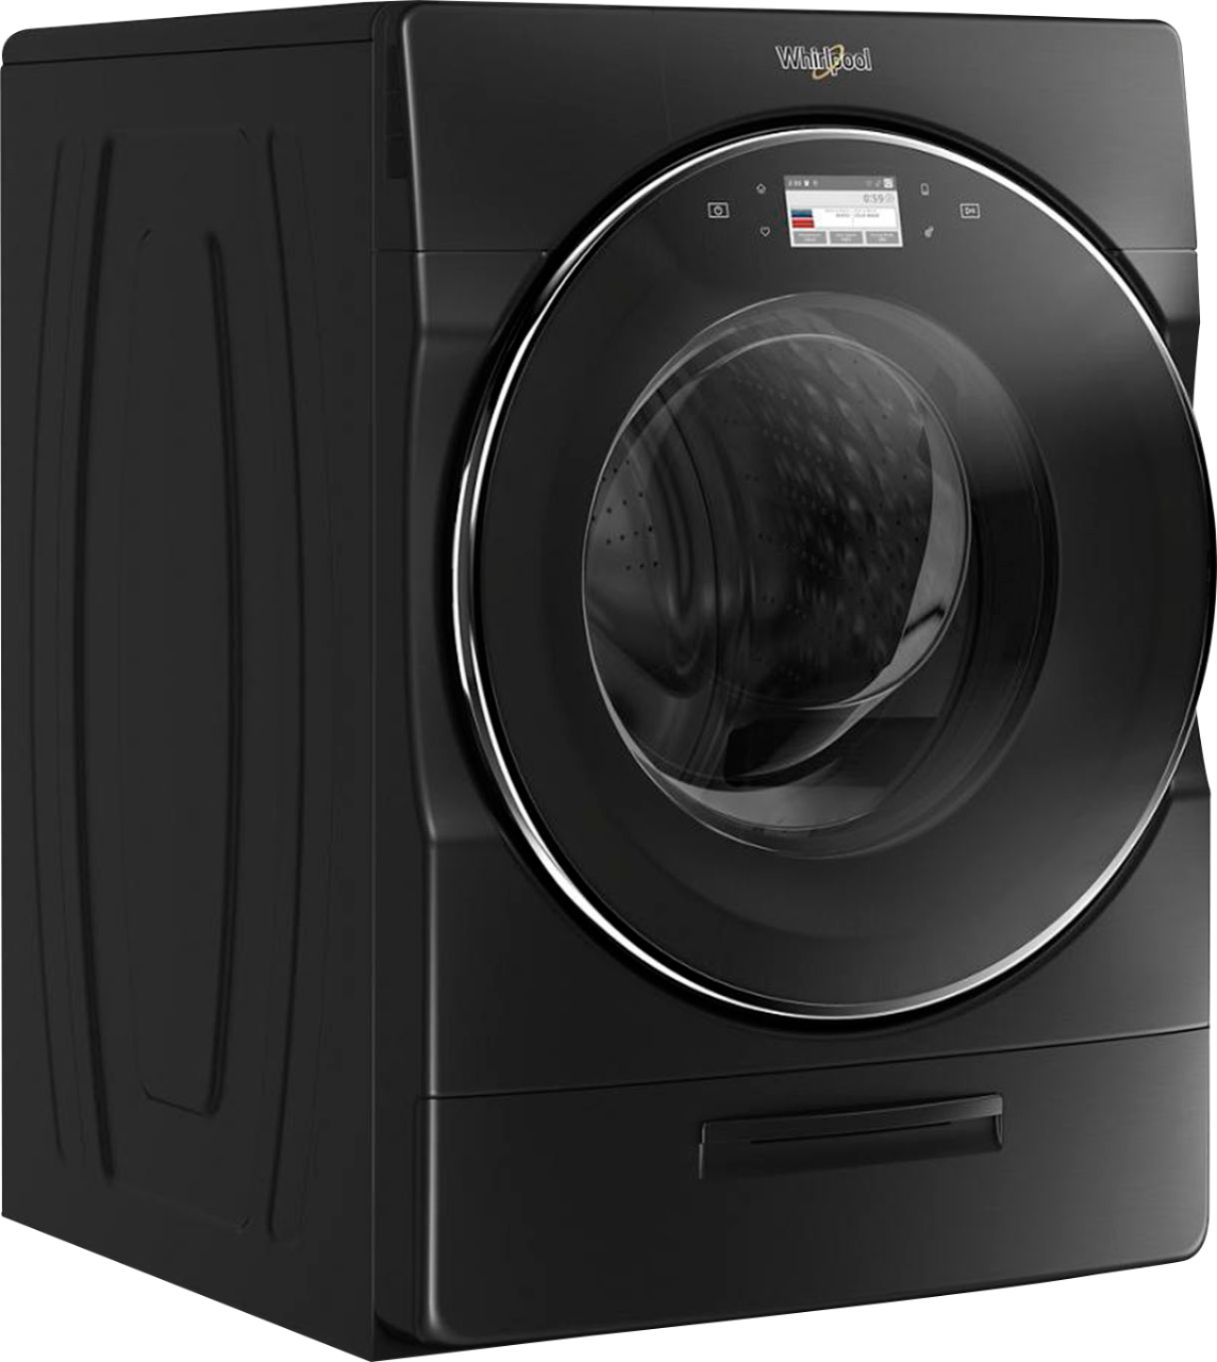 Angle View: Whirlpool - 7.4 Cu. Ft. Stackable Smart Electric Dryer with Steam and Wrinkle Shield Plus Option - Black shadow